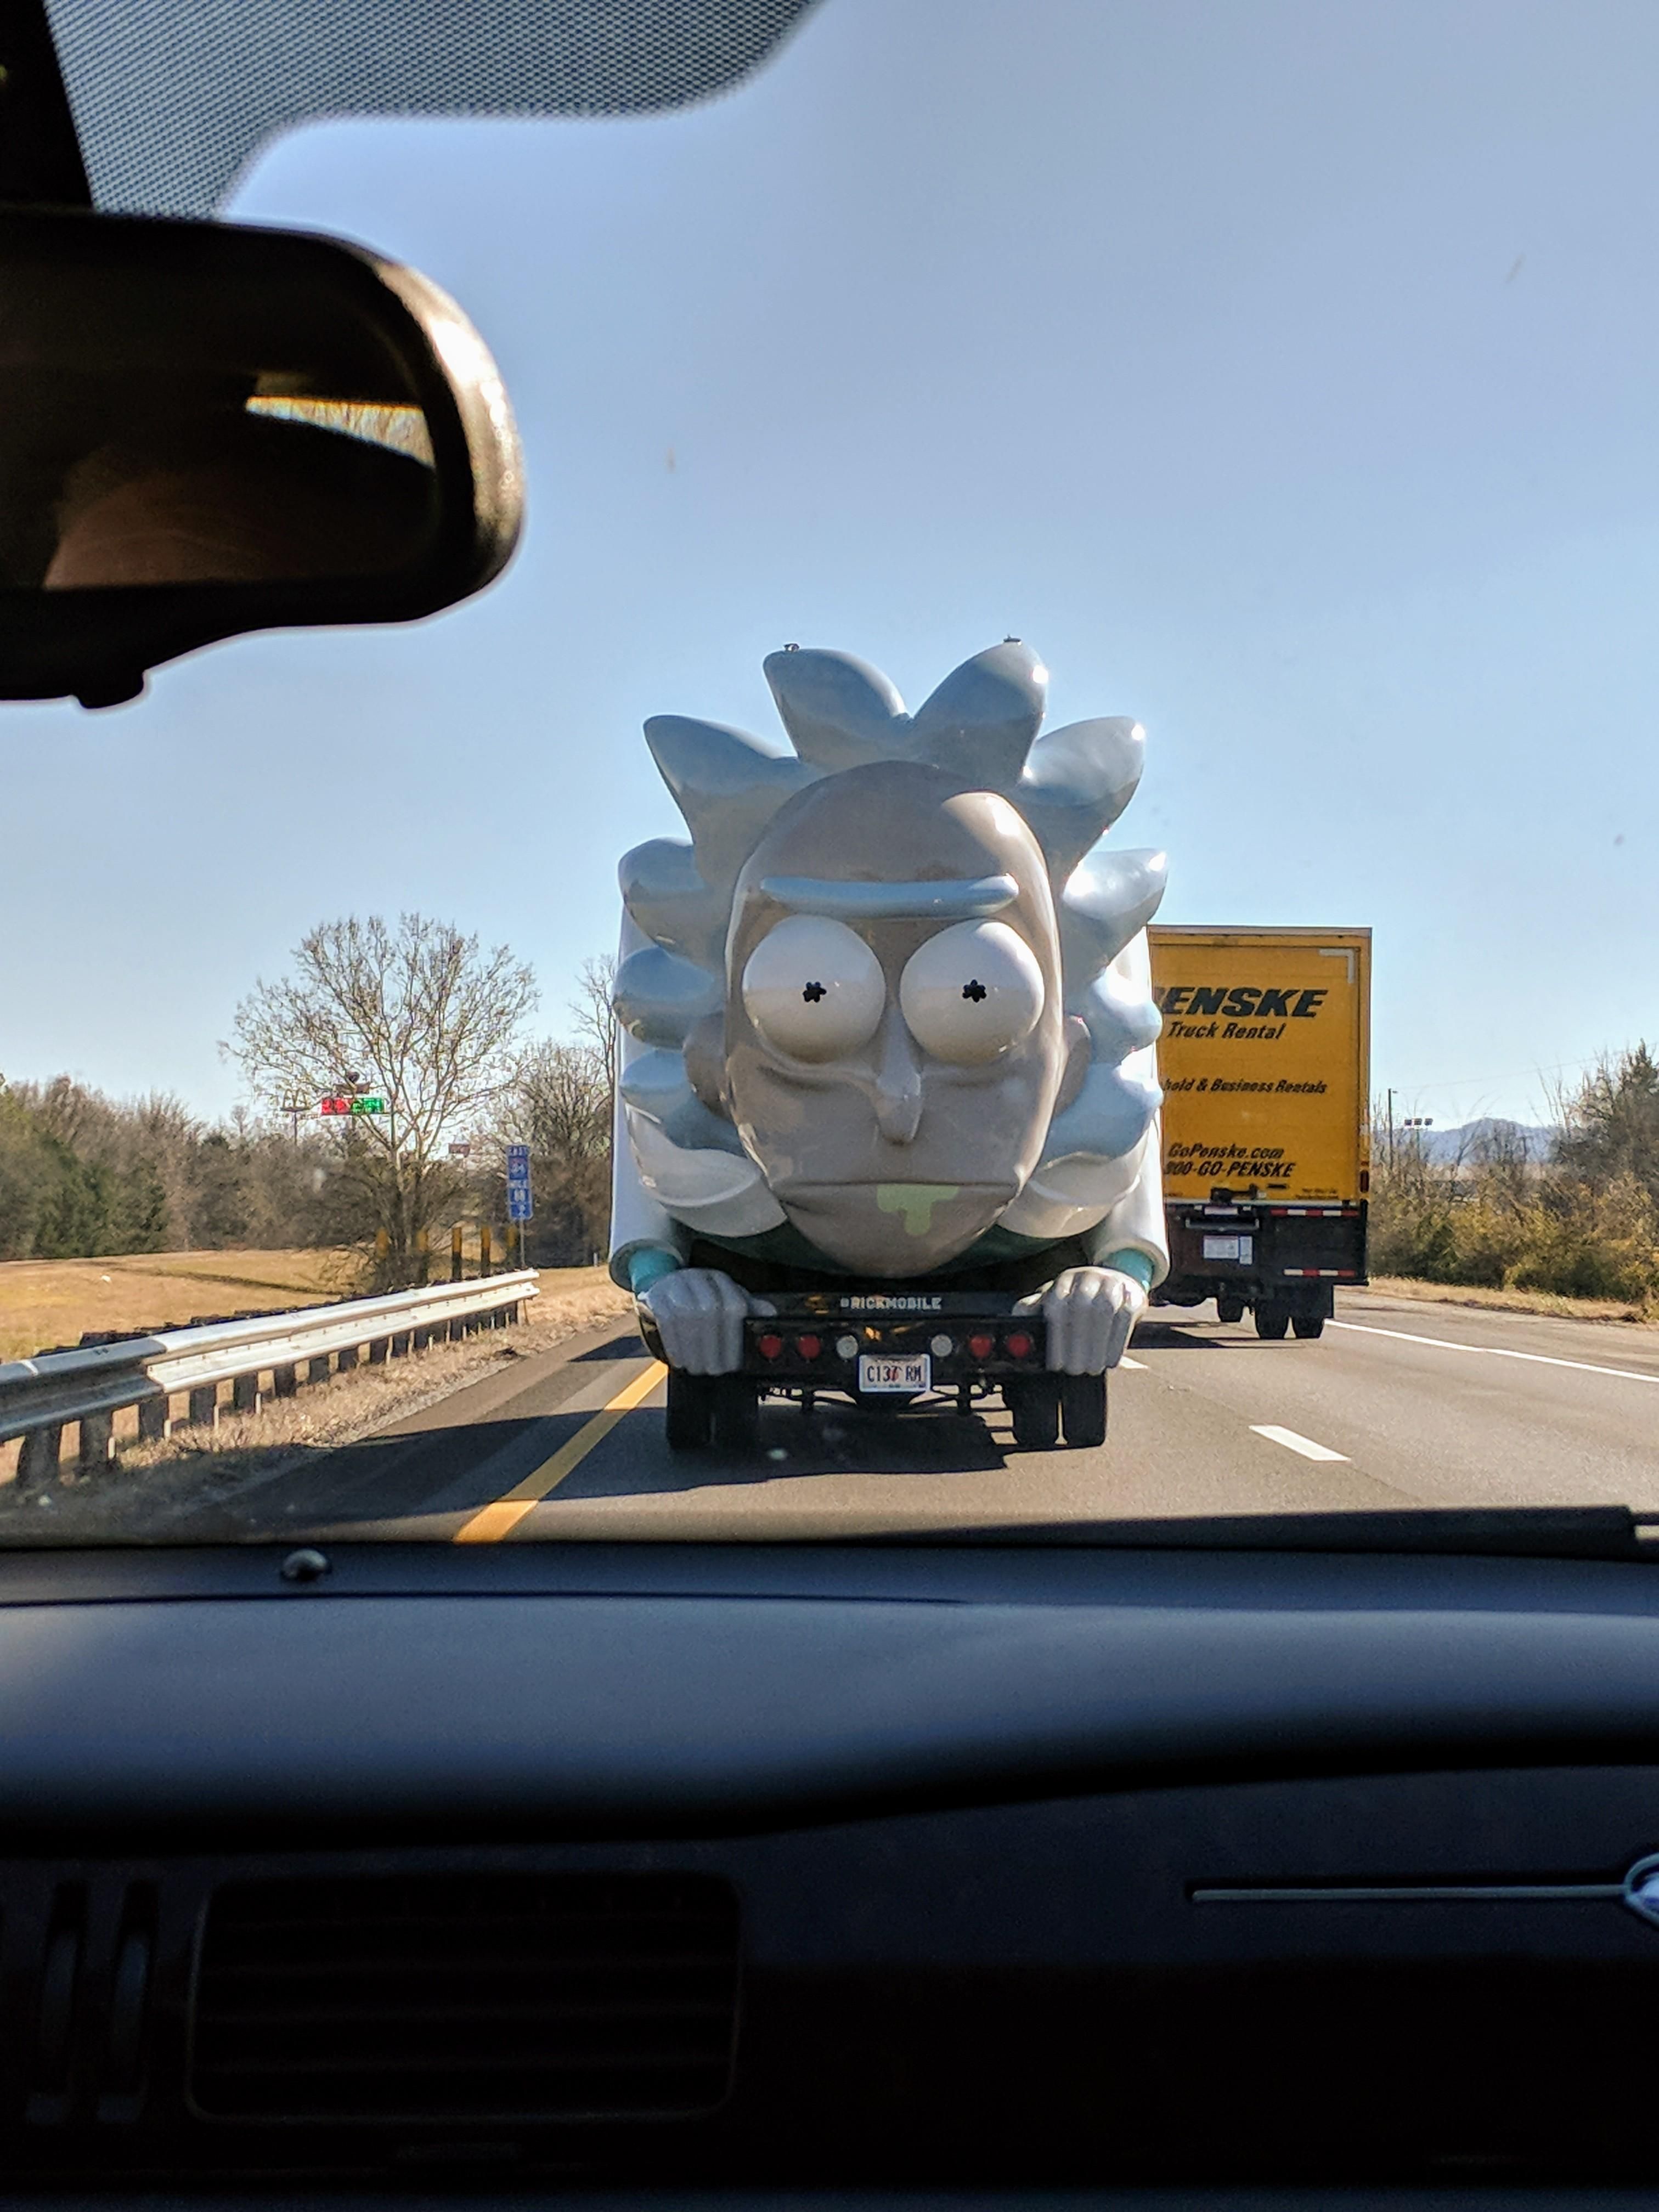 Meanwhile, in front of me on the interstate...